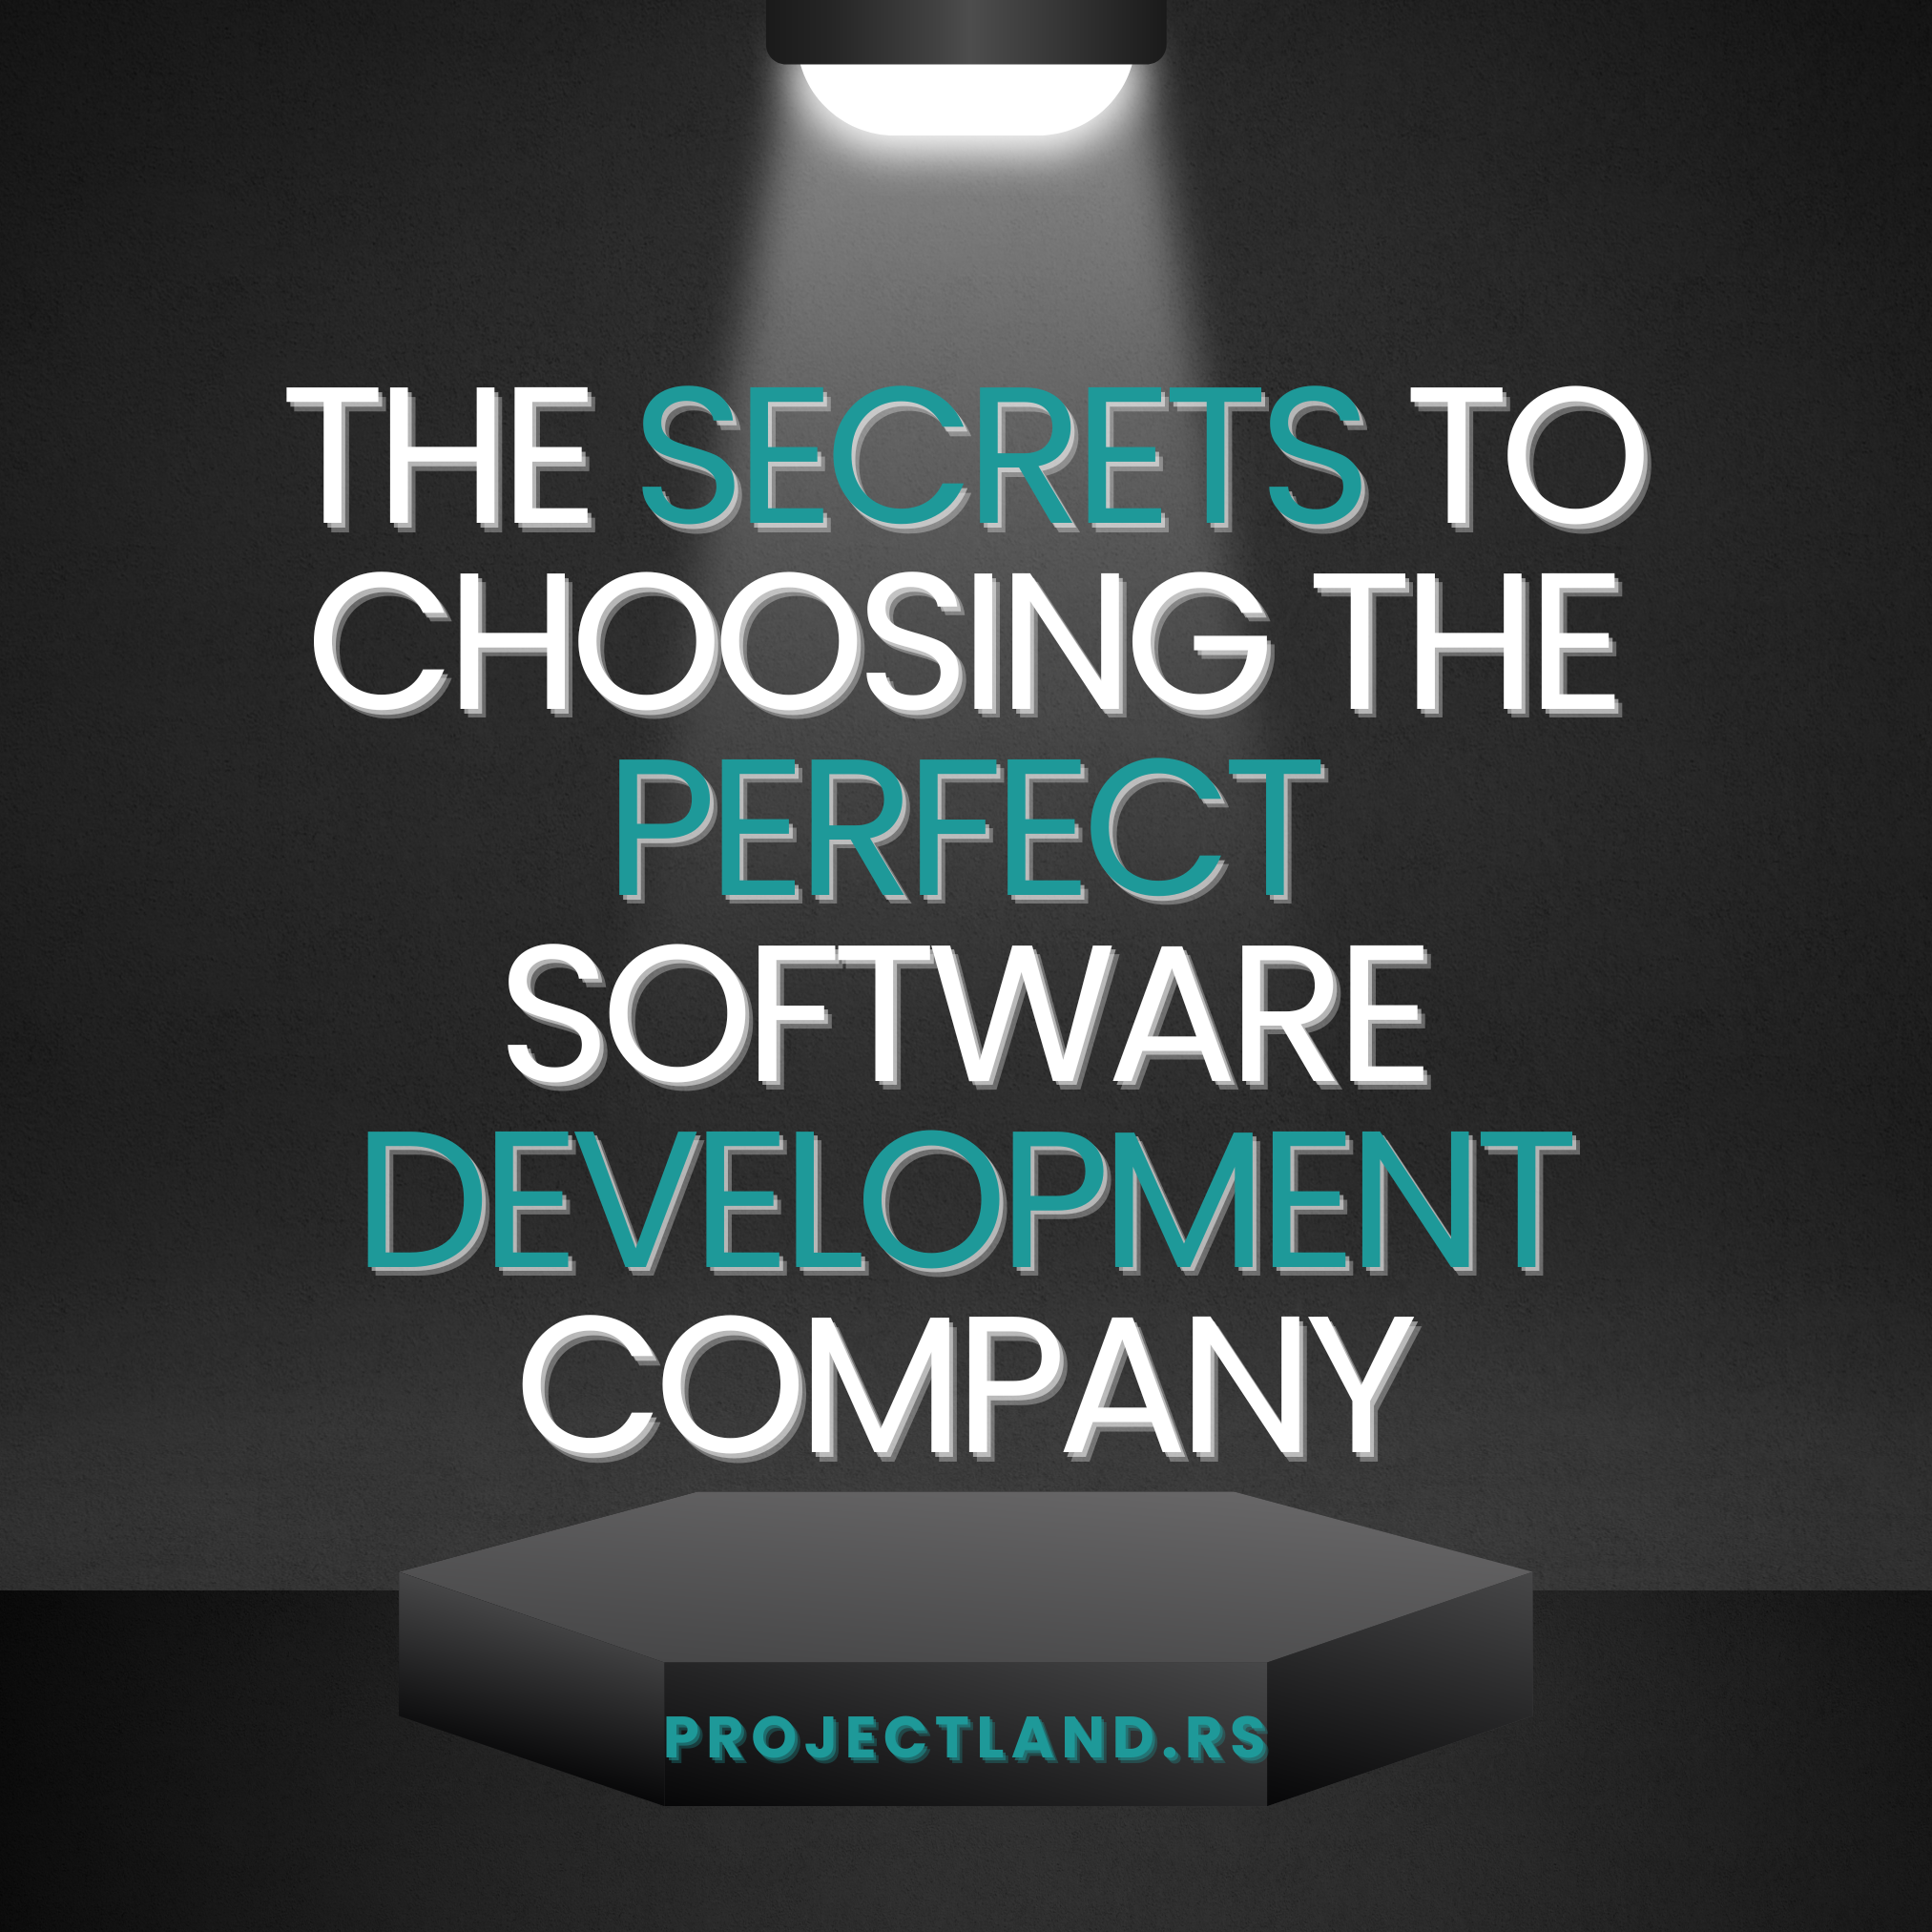 THE_SECRETS_TO_CHOOSING_THE_PERFECT_SOFTWARE_DEVELOPMENT_COMPANY